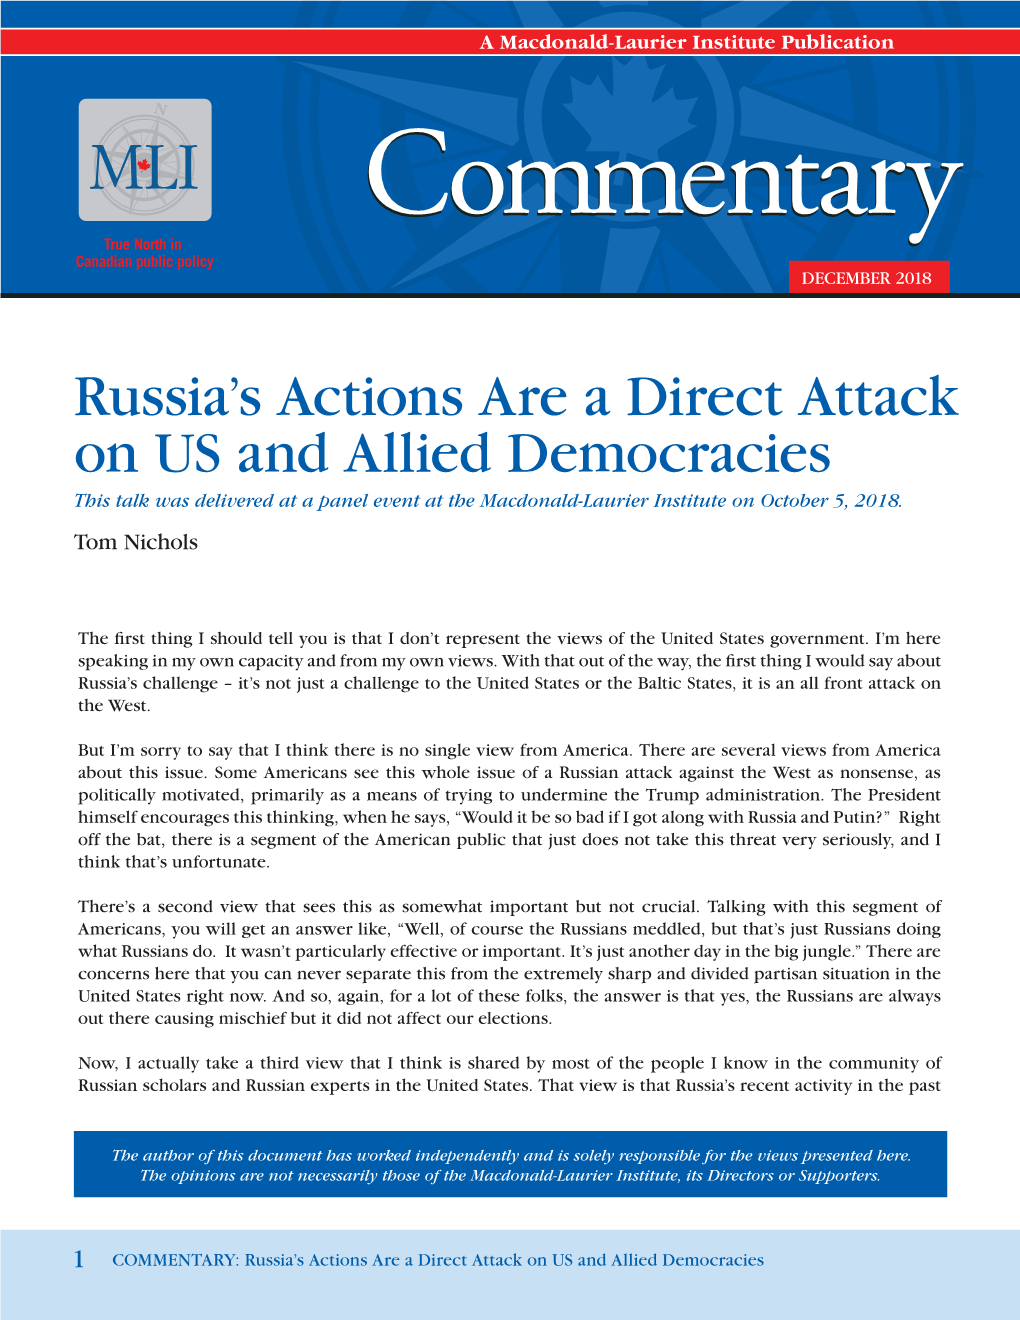 Russia's Actions Are a Direct Attack on US and Allied Democracies